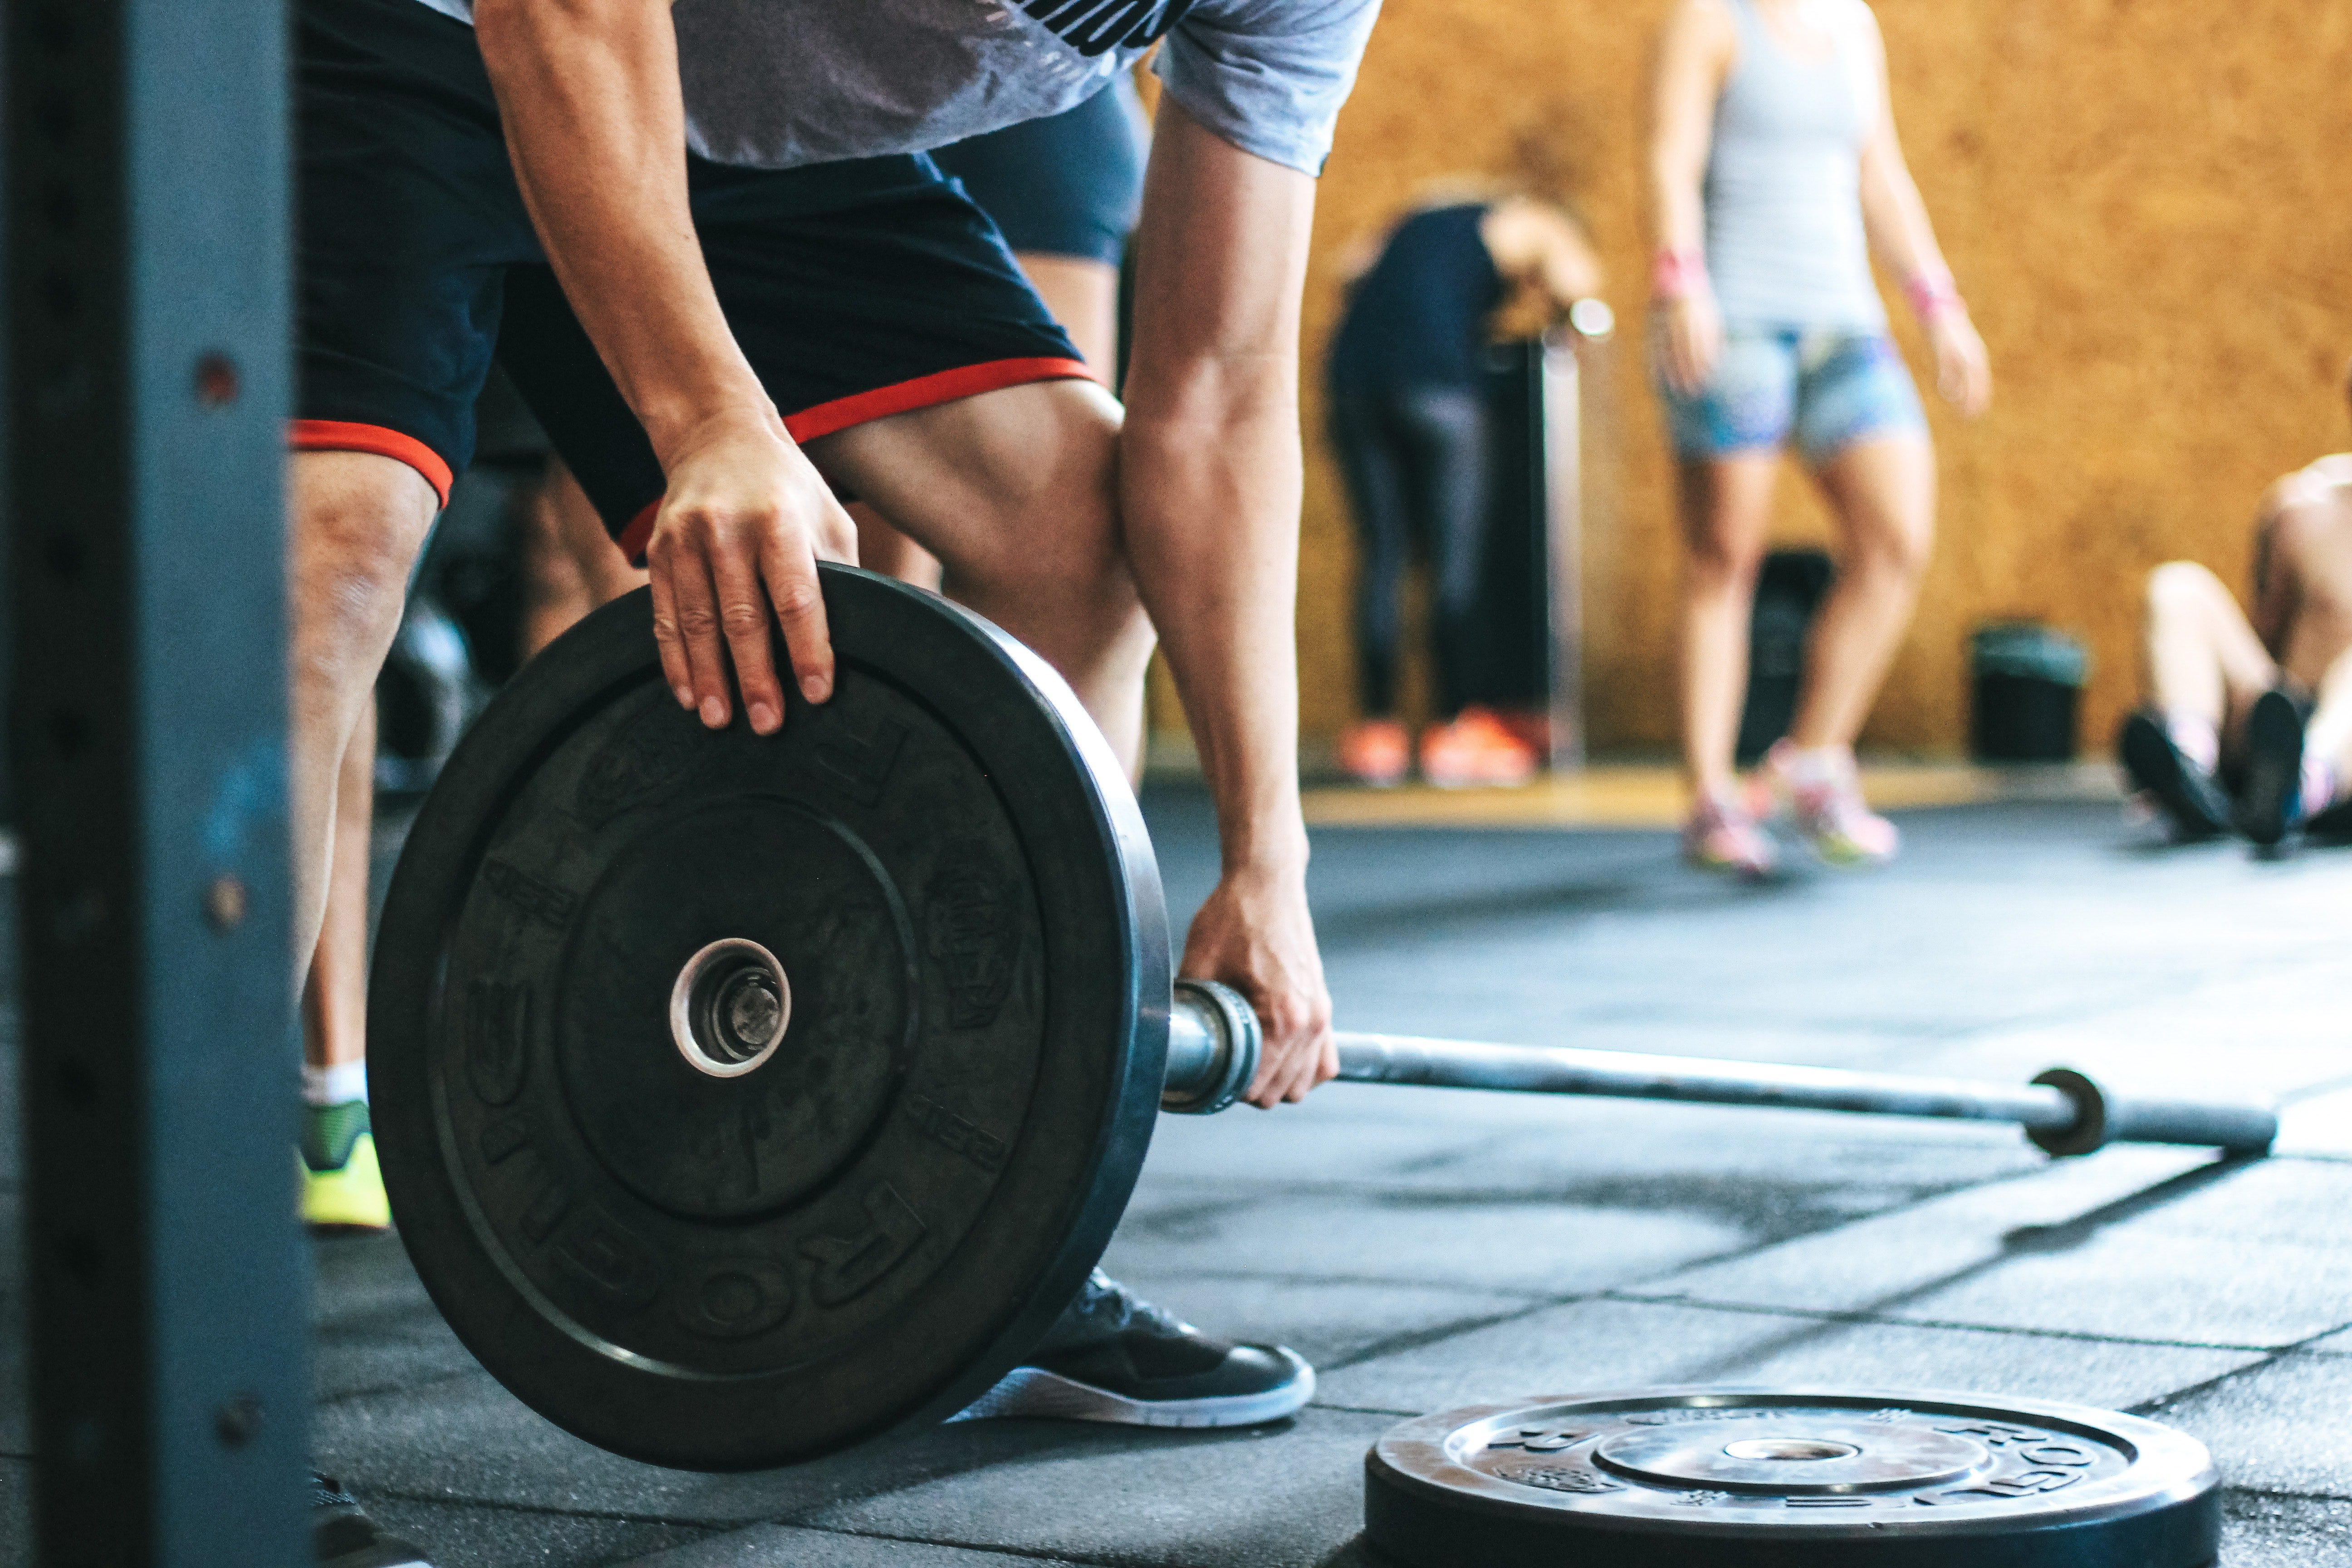 Those at the gym were impressed by the old man's strength. | Source: Pexels